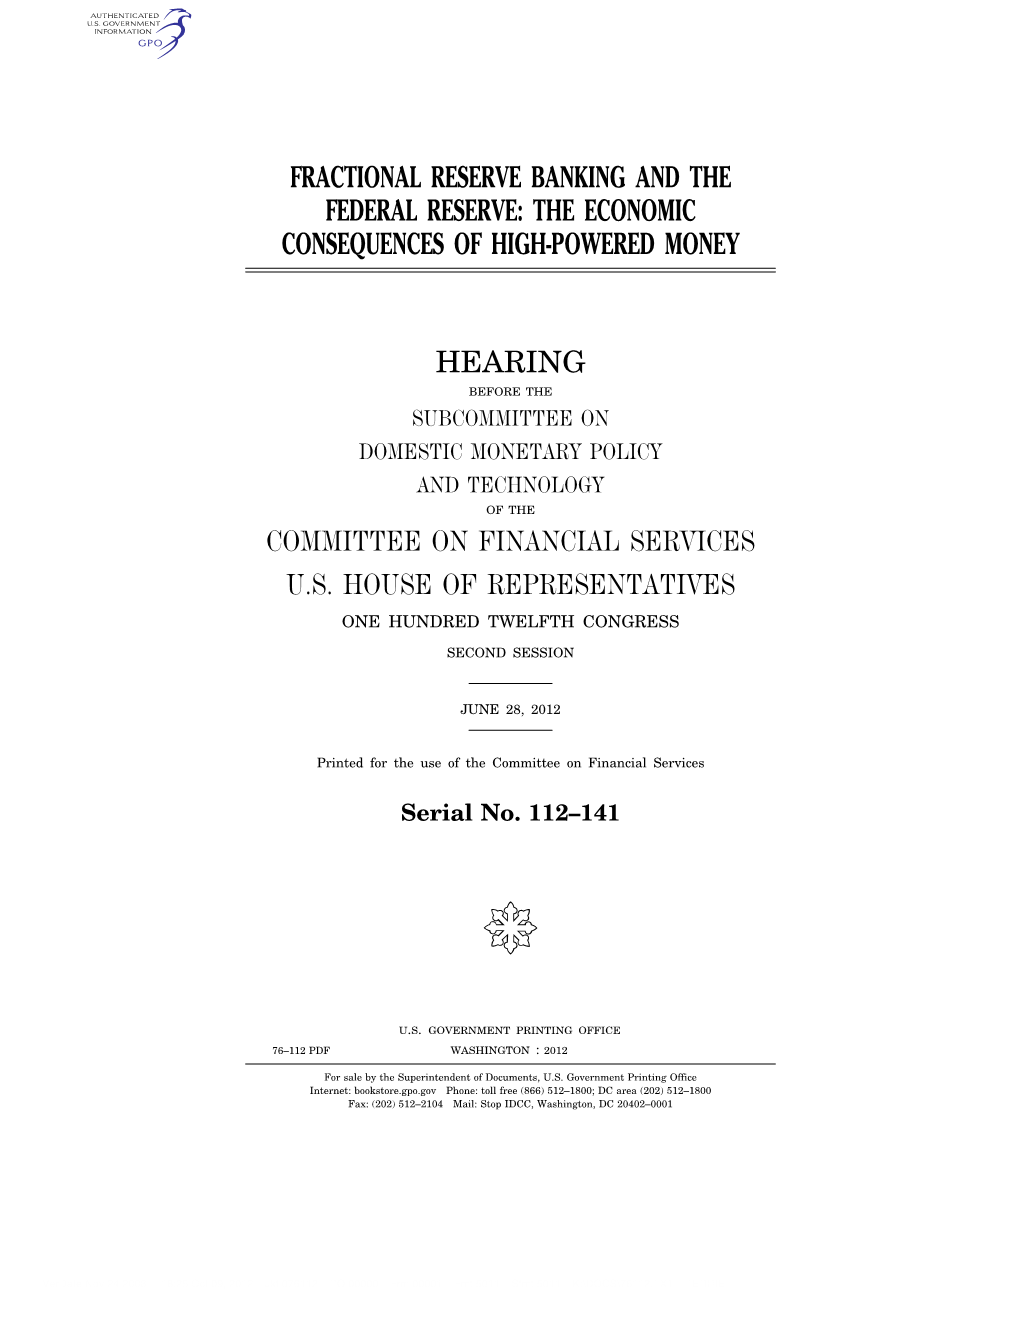 Fractional Reserve Banking and the Federal Reserve: the Economic Consequences of High-Powered Money